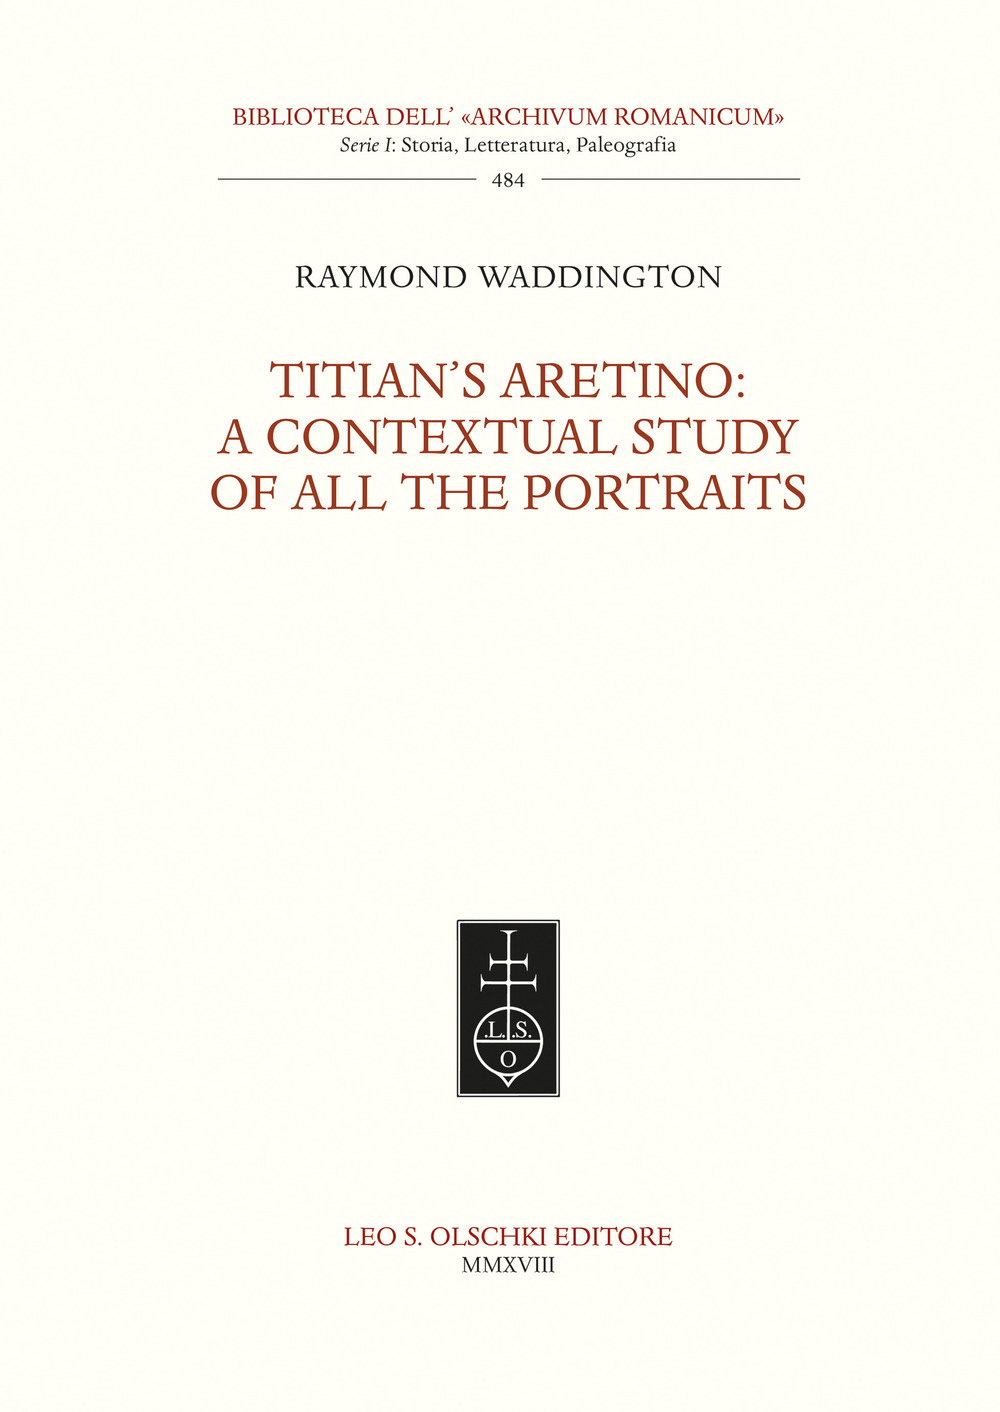 Titian's Aretino: a contextual study of all the portraits